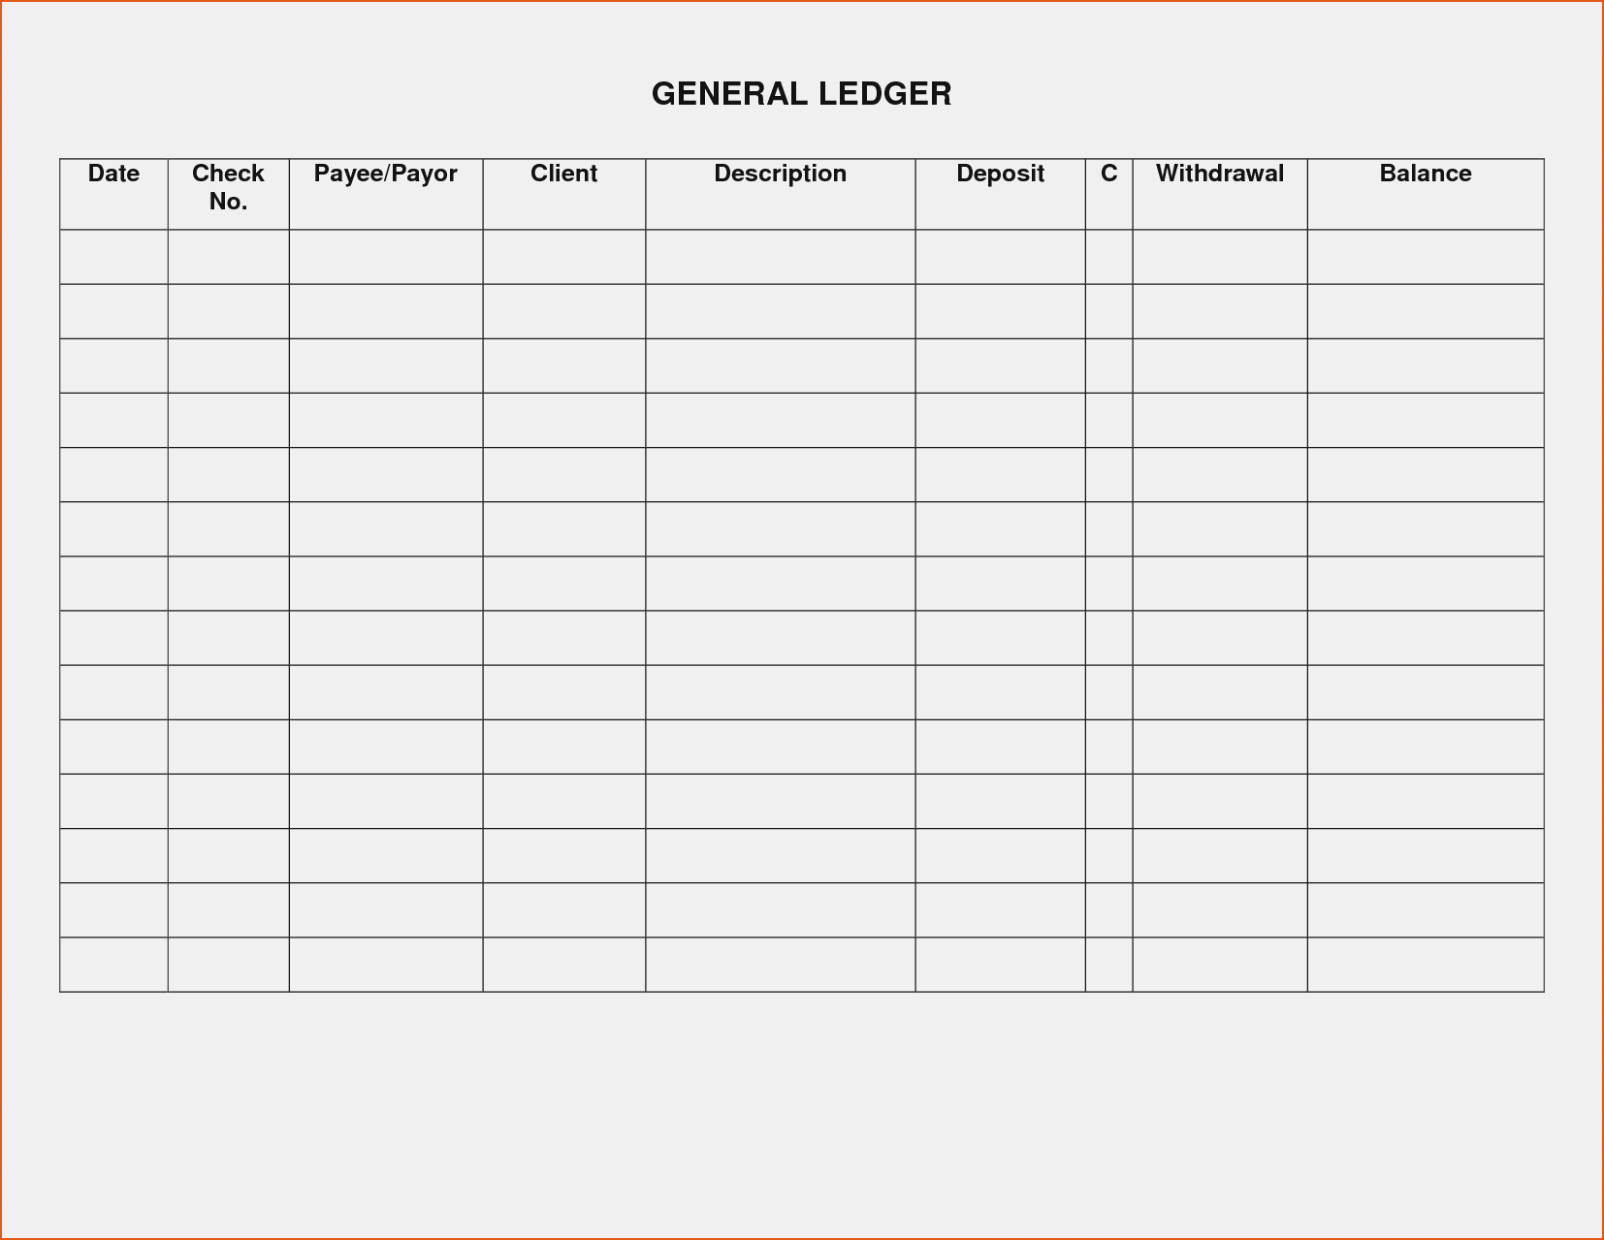 Printable Ledger Template Rent Receipts Rental Forms Simple With Free